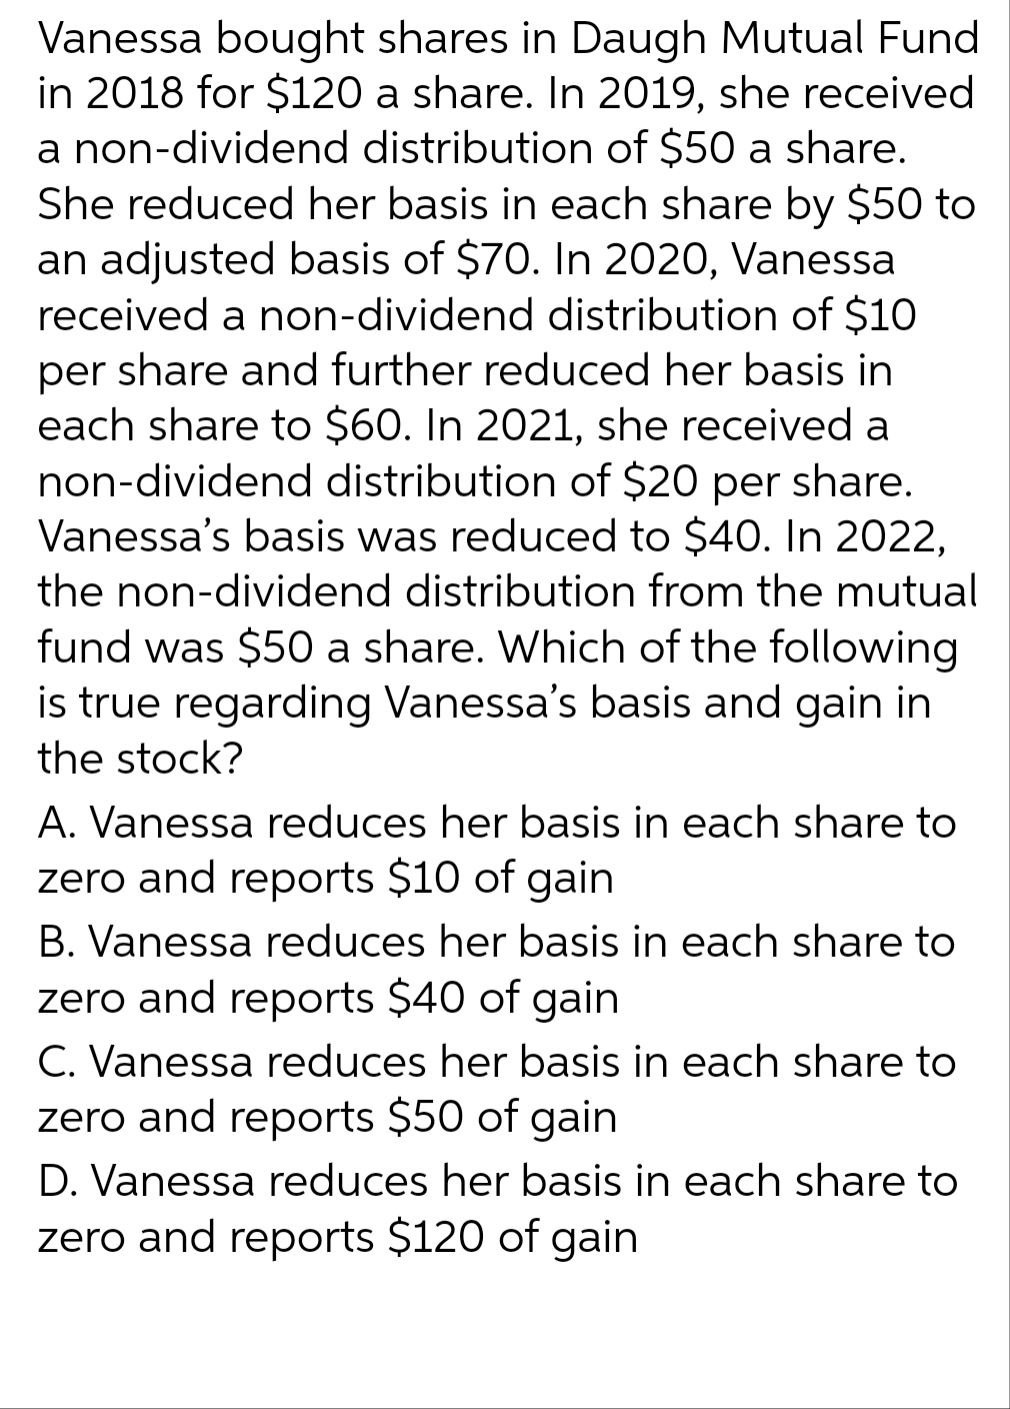 Vanessa bought shares in Daugh Mutual Fund
in 2018 for $120 a share. In 2019, she received
a non-dividend distribution of $50 a share.
She reduced her basis in each share by $50 to
an adjusted basis of $70. In 2020, Vanessa
received a non-dividend distribution of $10
per share and further reduced her basis in
each share to $60. In 2021, she received a
non-dividend distribution of $20 per share.
Vanessa's basis was reduced to $40. In 2022,
the non-dividend distribution from the mutual
fund was $50 a share. Which of the following
is true regarding Vanessa's basis and gain in
the stock?
A. Vanessa reduces her basis in each share to
zero and reports $10 of gain
B. Vanessa reduces her basis in each share to
zero and reports $40 of gain
C. Vanessa reduces her basis in each share to
zero and reports $50 of gain
D. Vanessa reduces her basis in each share to
zero and reports $120 of gain